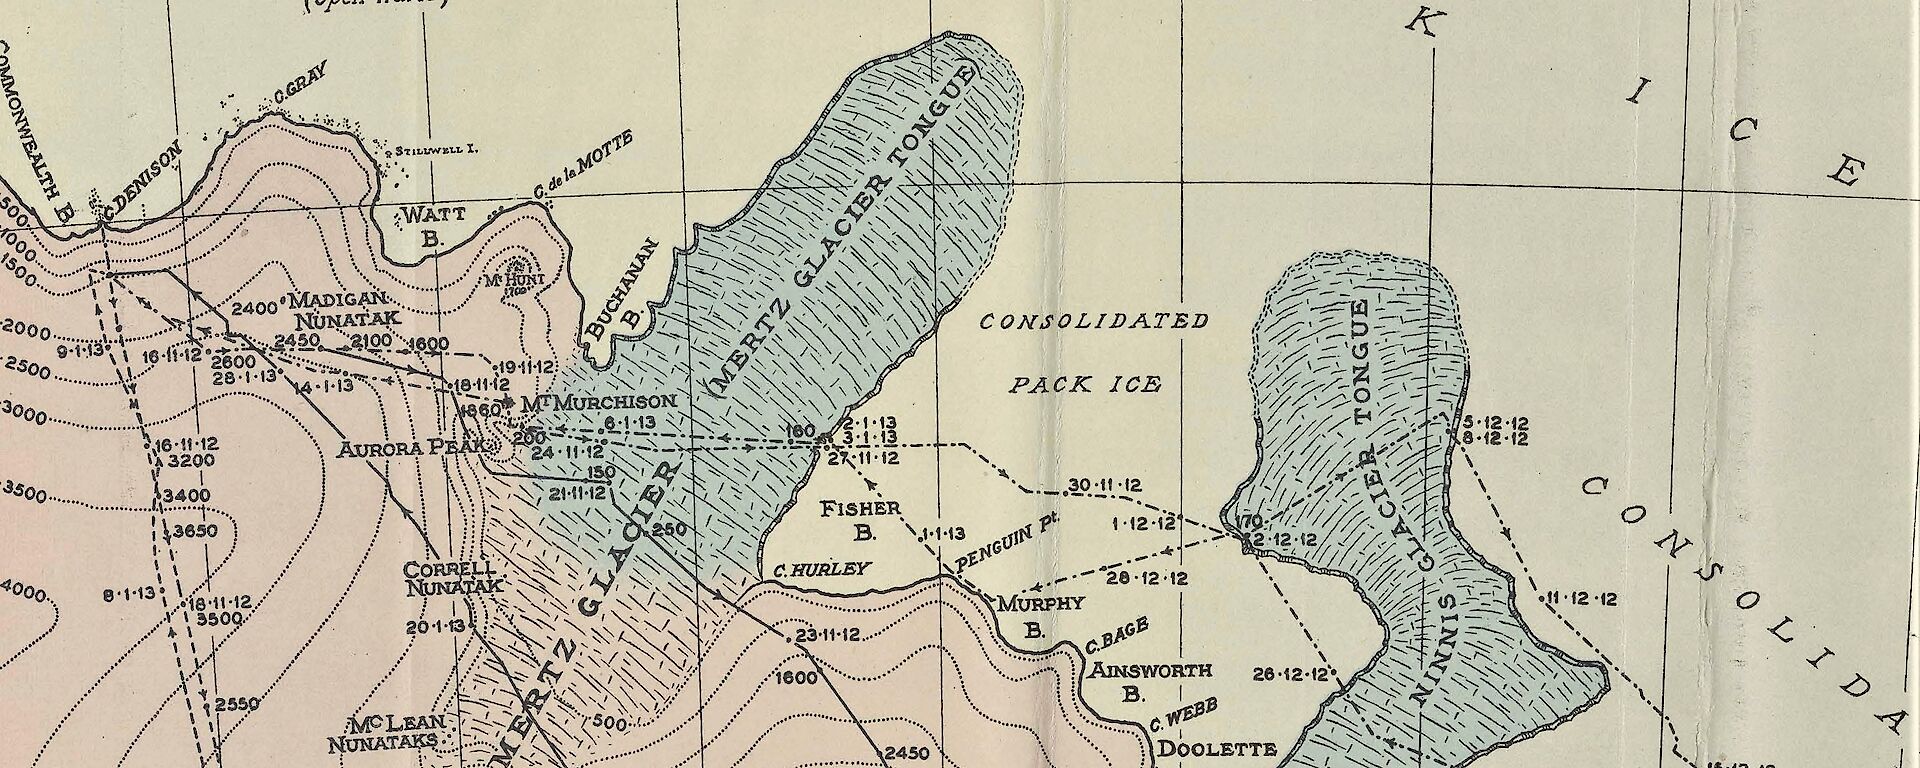 An old map showing a surveyed section of the Antarctic coast.